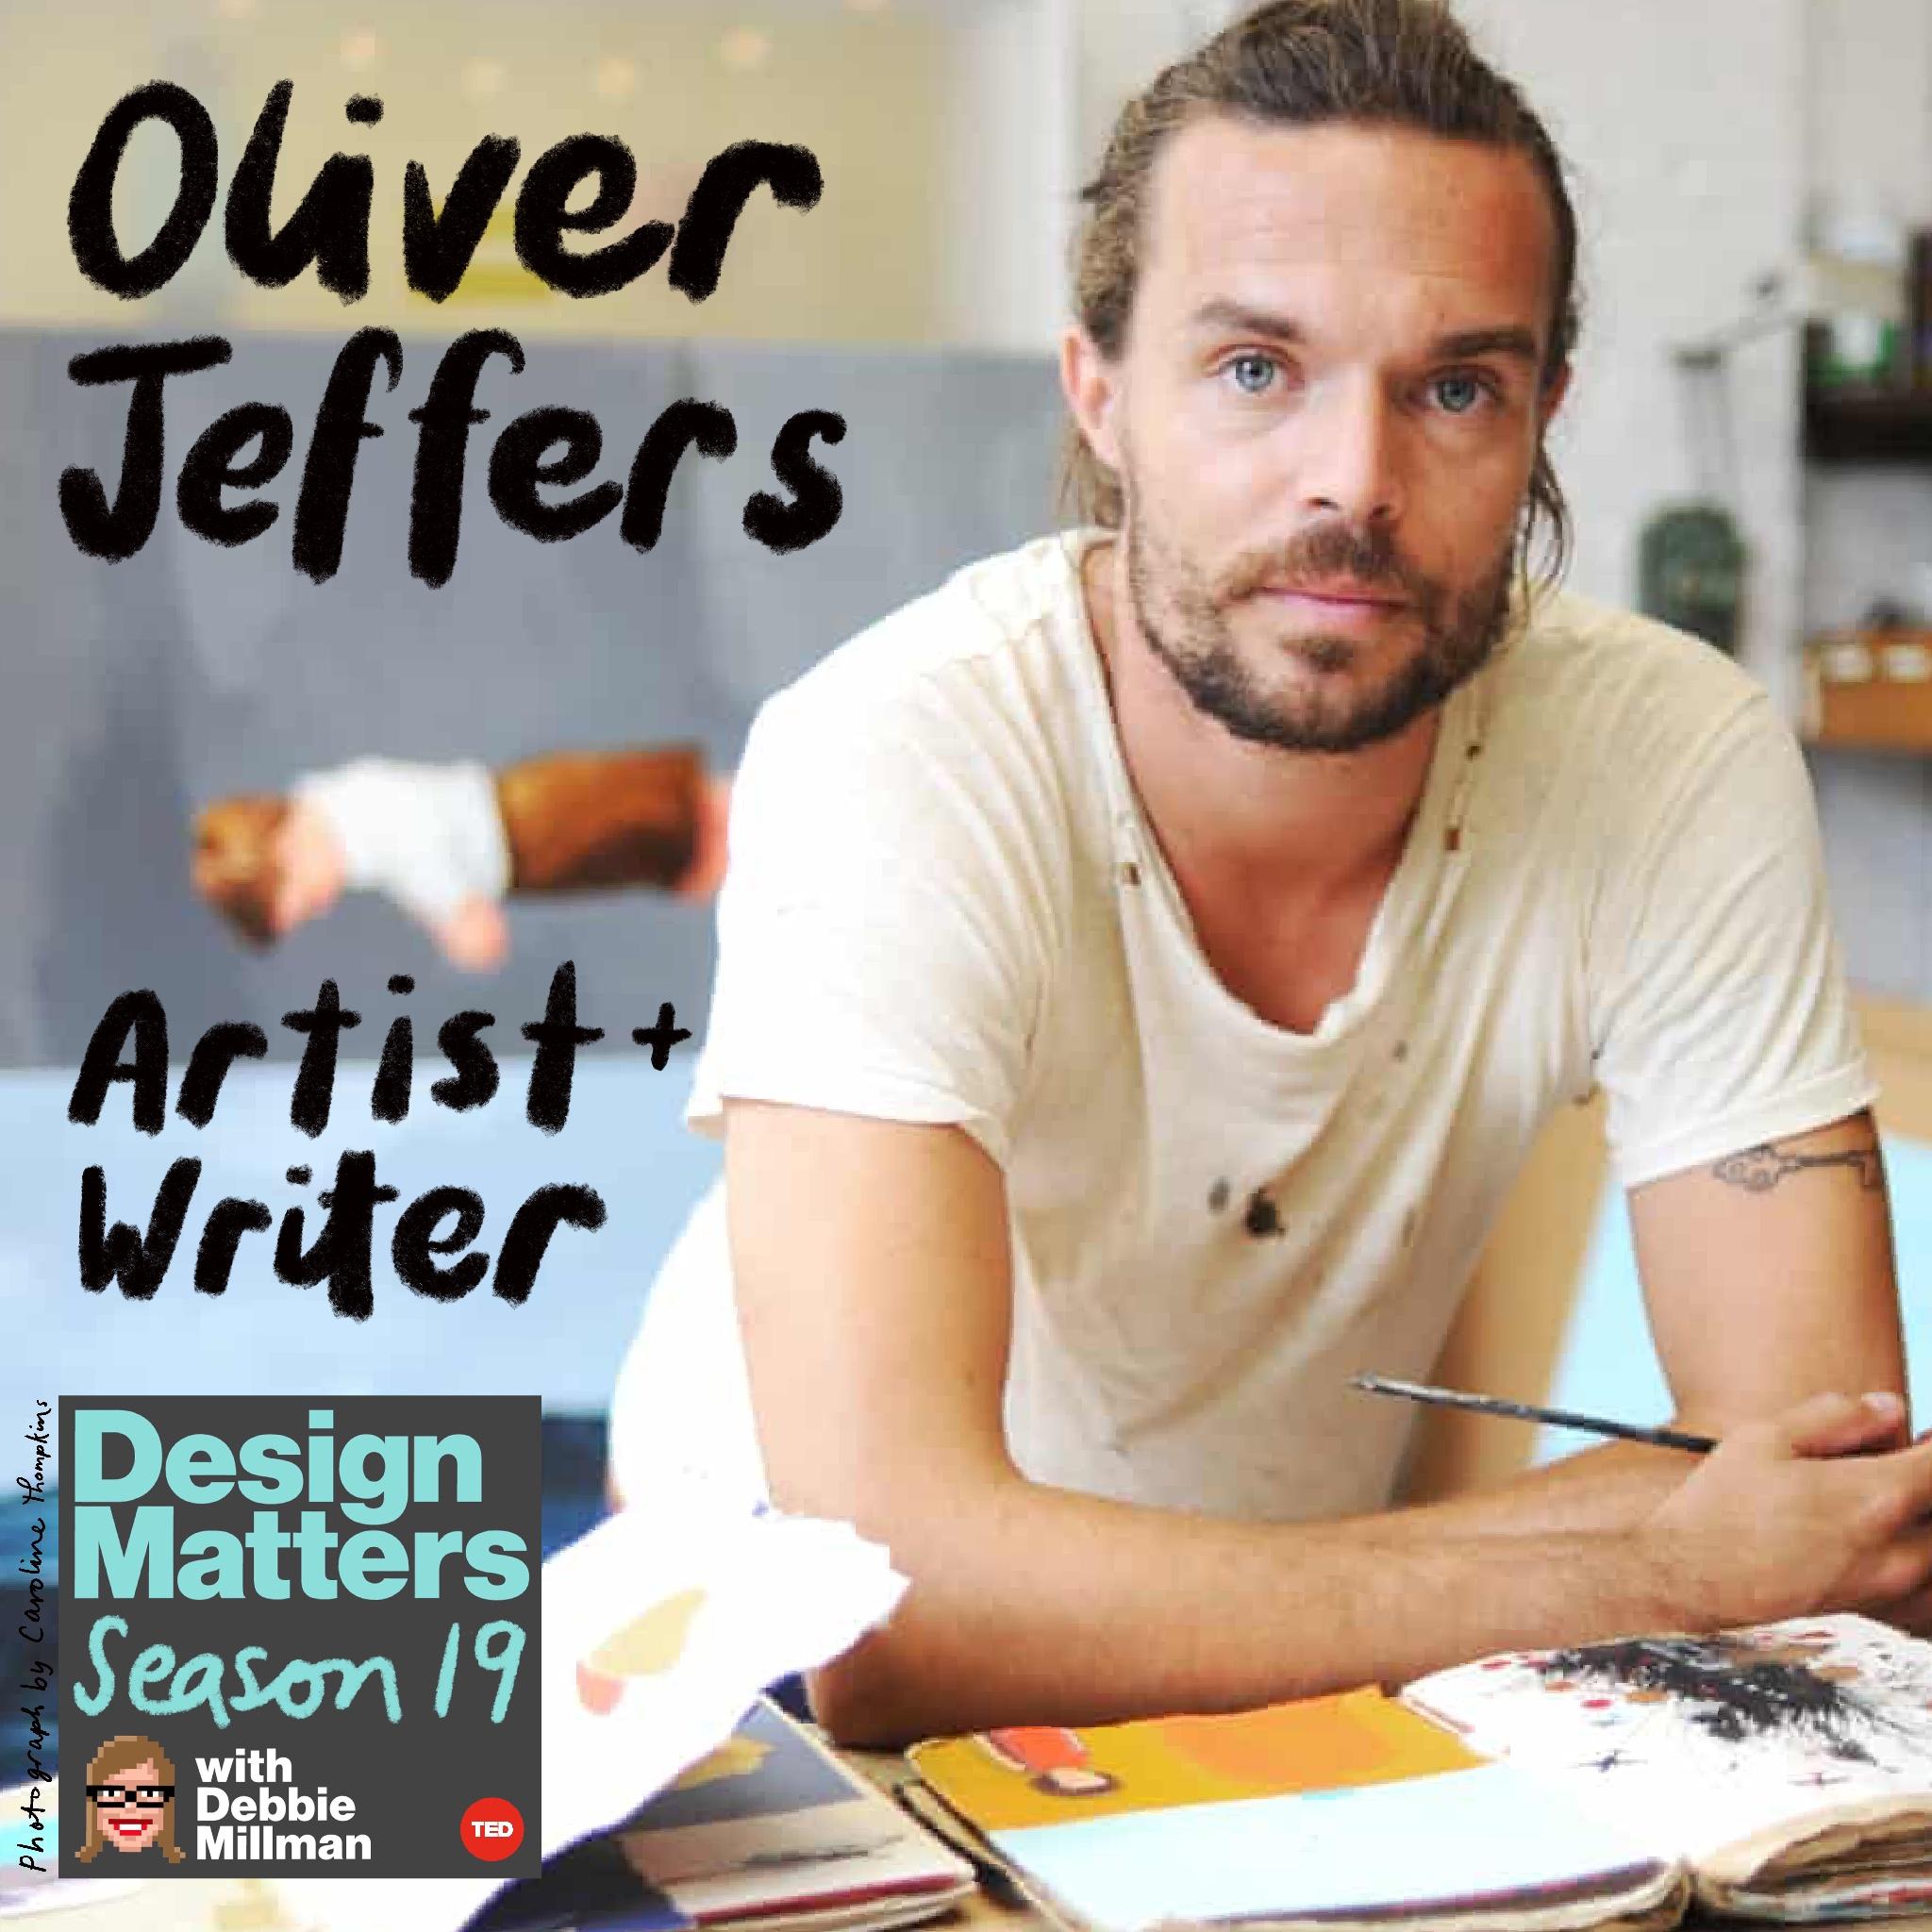 Thumbnail for "Oliver Jeffers".